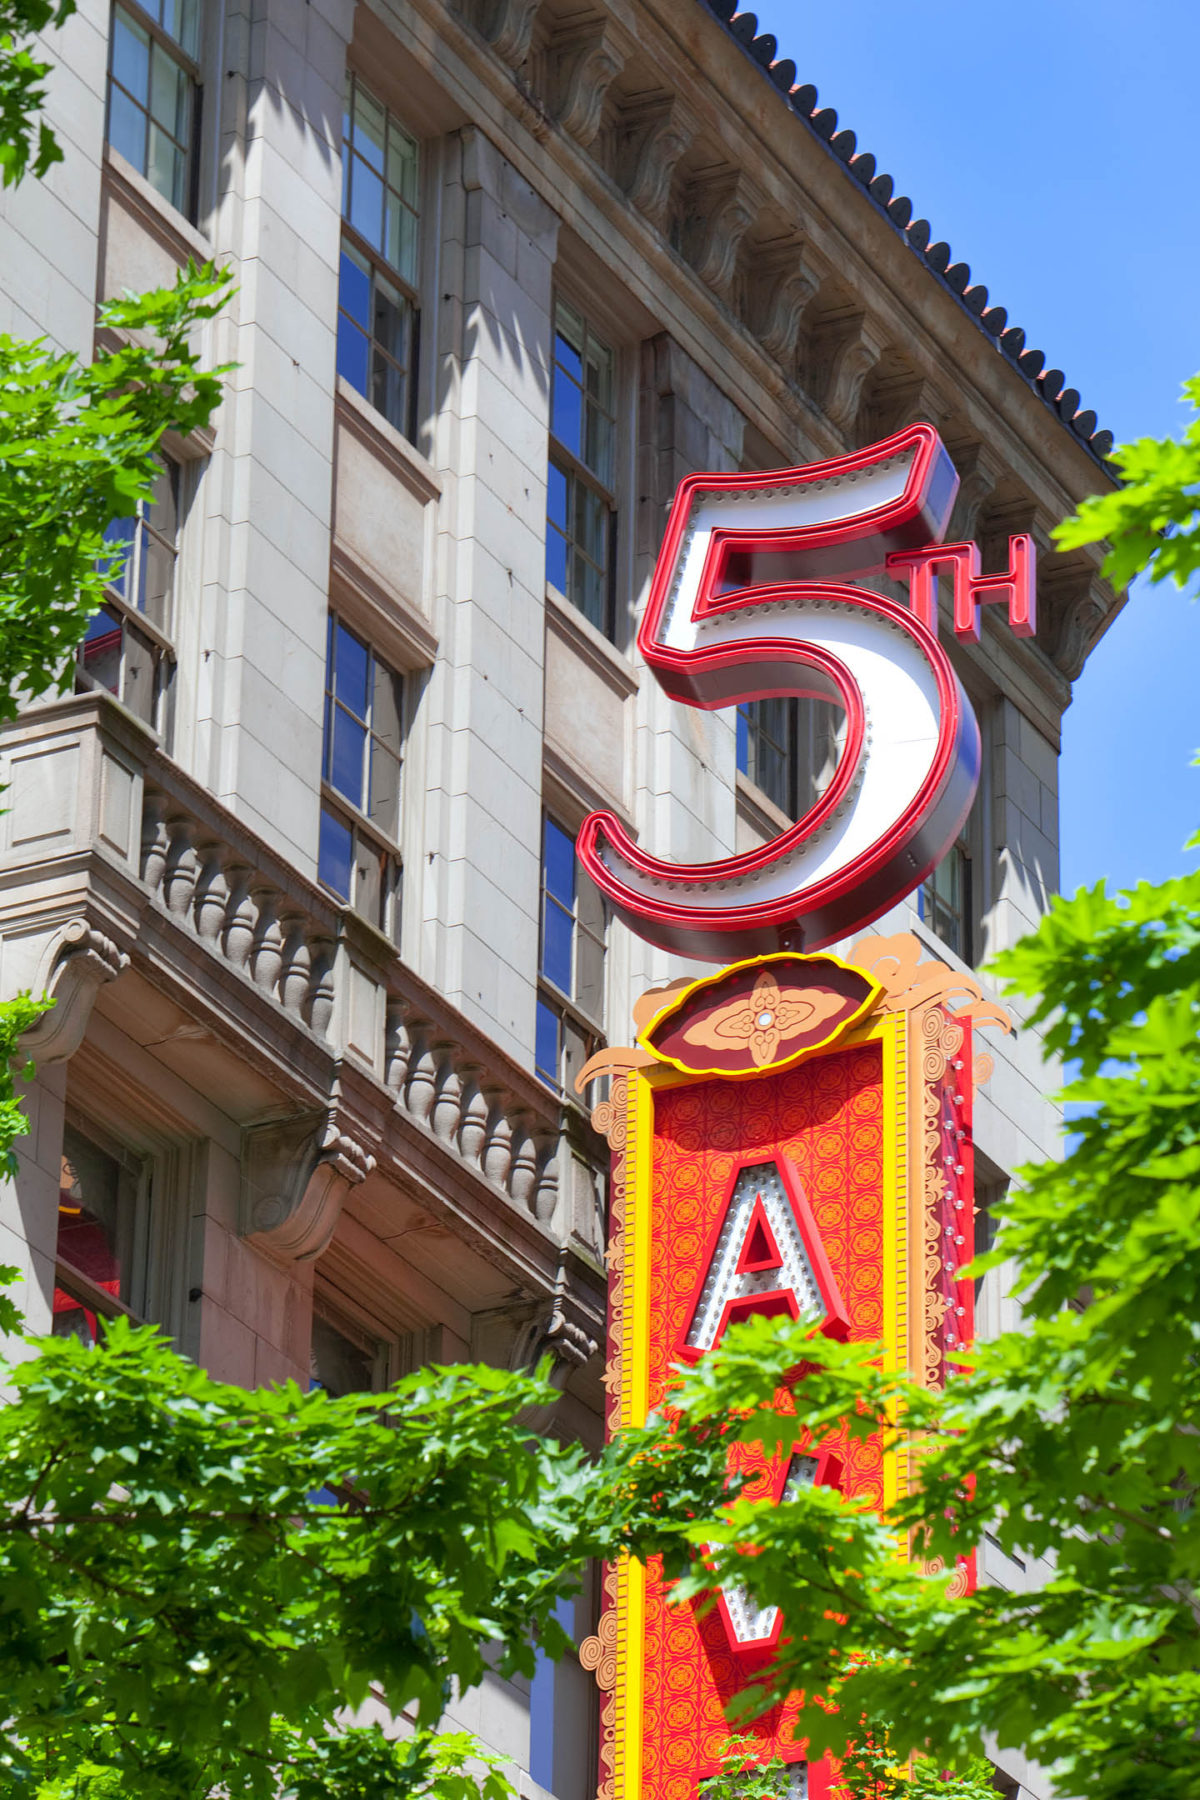 Close up photo of the 5th Avenue Theater marquee sign.